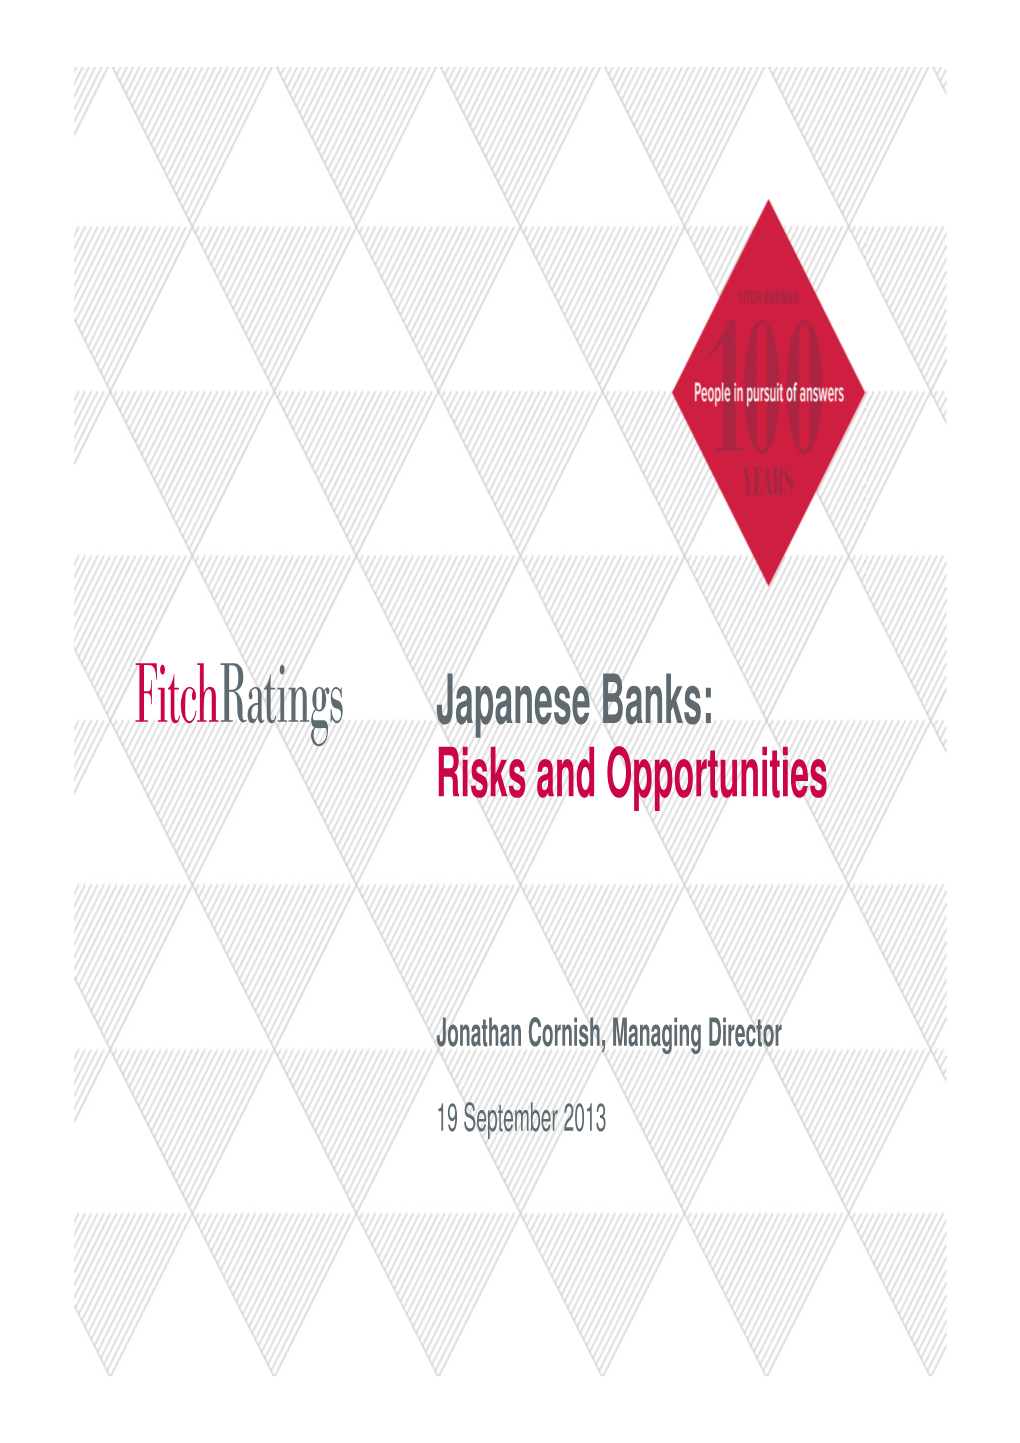 Japanese Banks: Risks and Opportunities